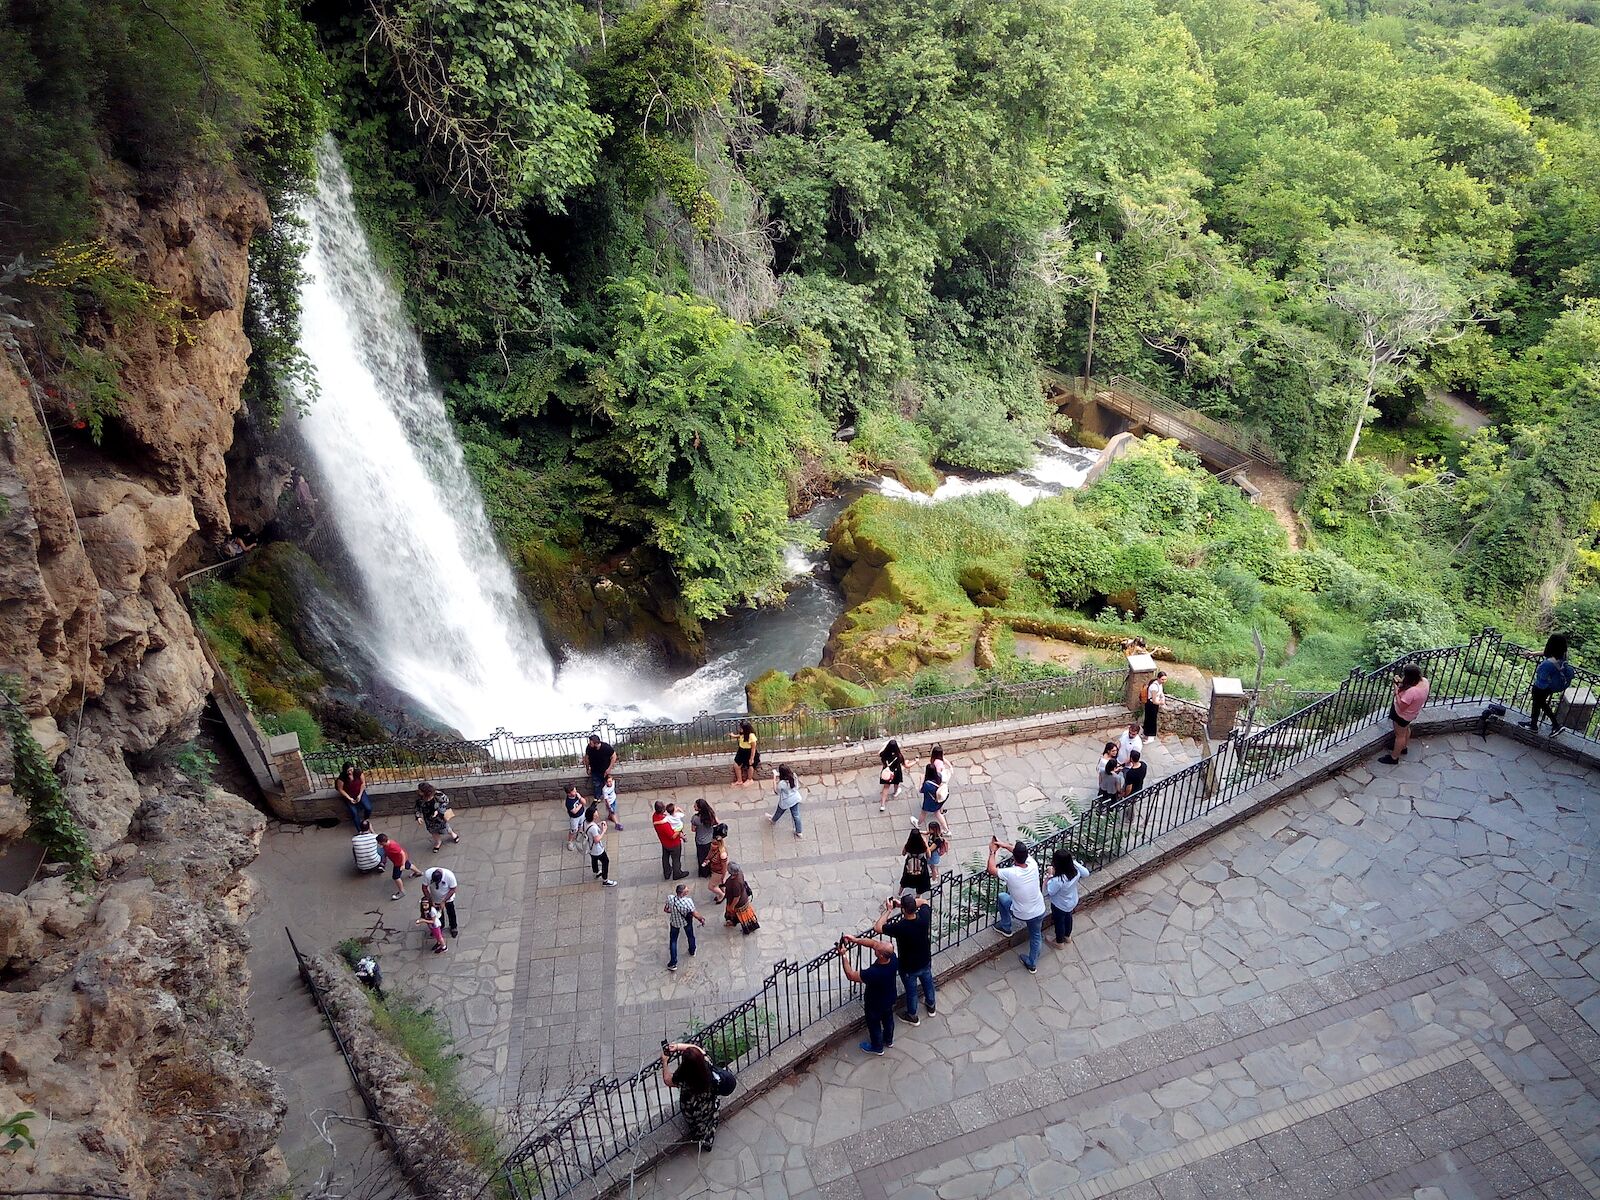 EDESSA, GREECE - MAY 28, 2018: Tourists taking photos with the Karanos waterfall of the Edessaios river. The waterfall measures 70 metres in height and is the biggest one in Greece.